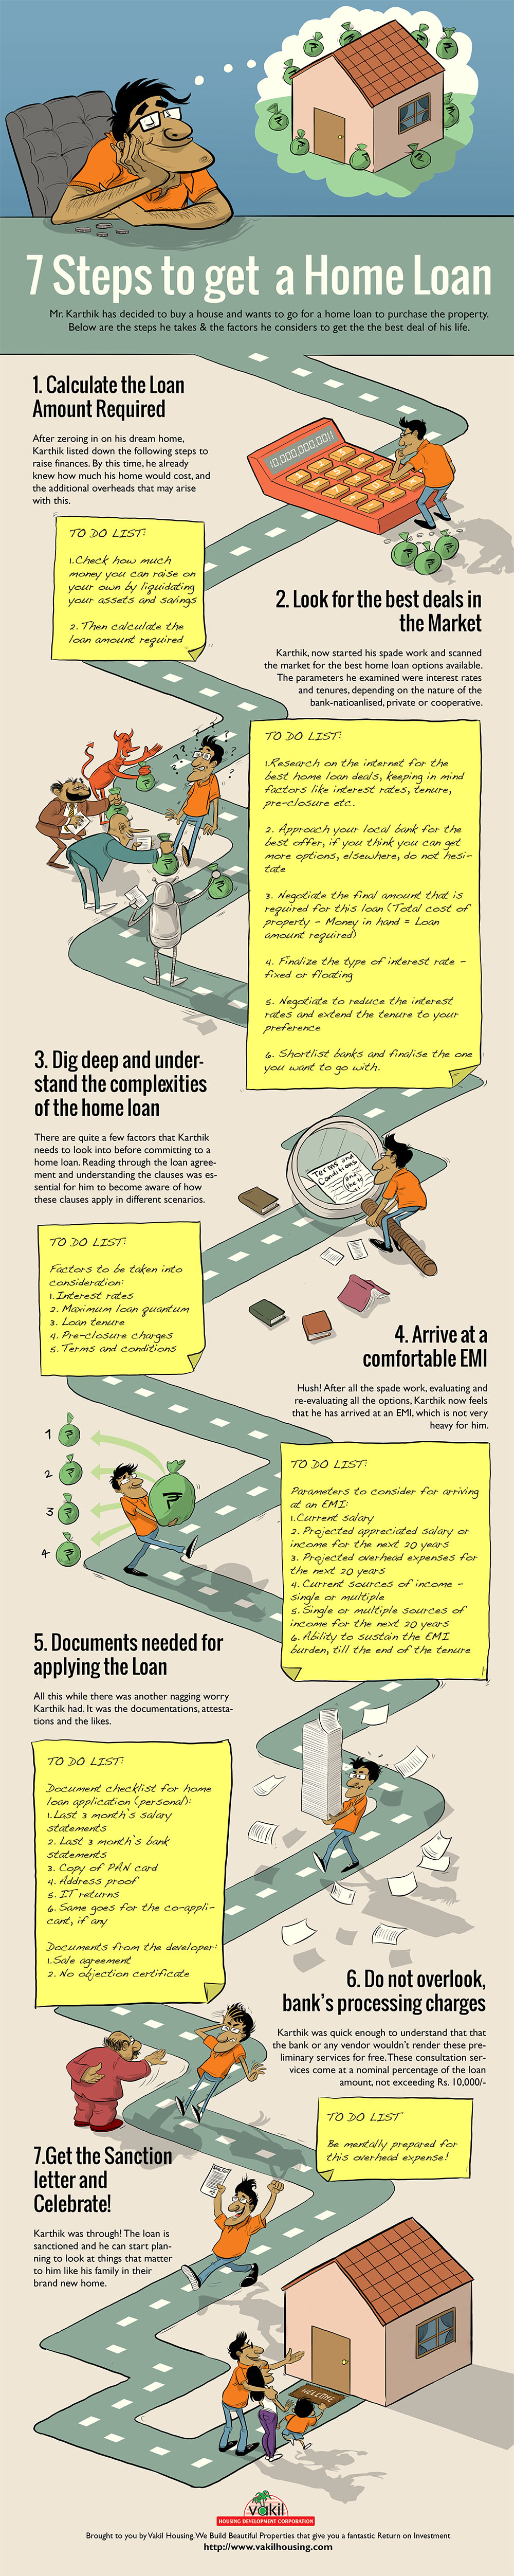 7 Steps to get a Home Loan in India